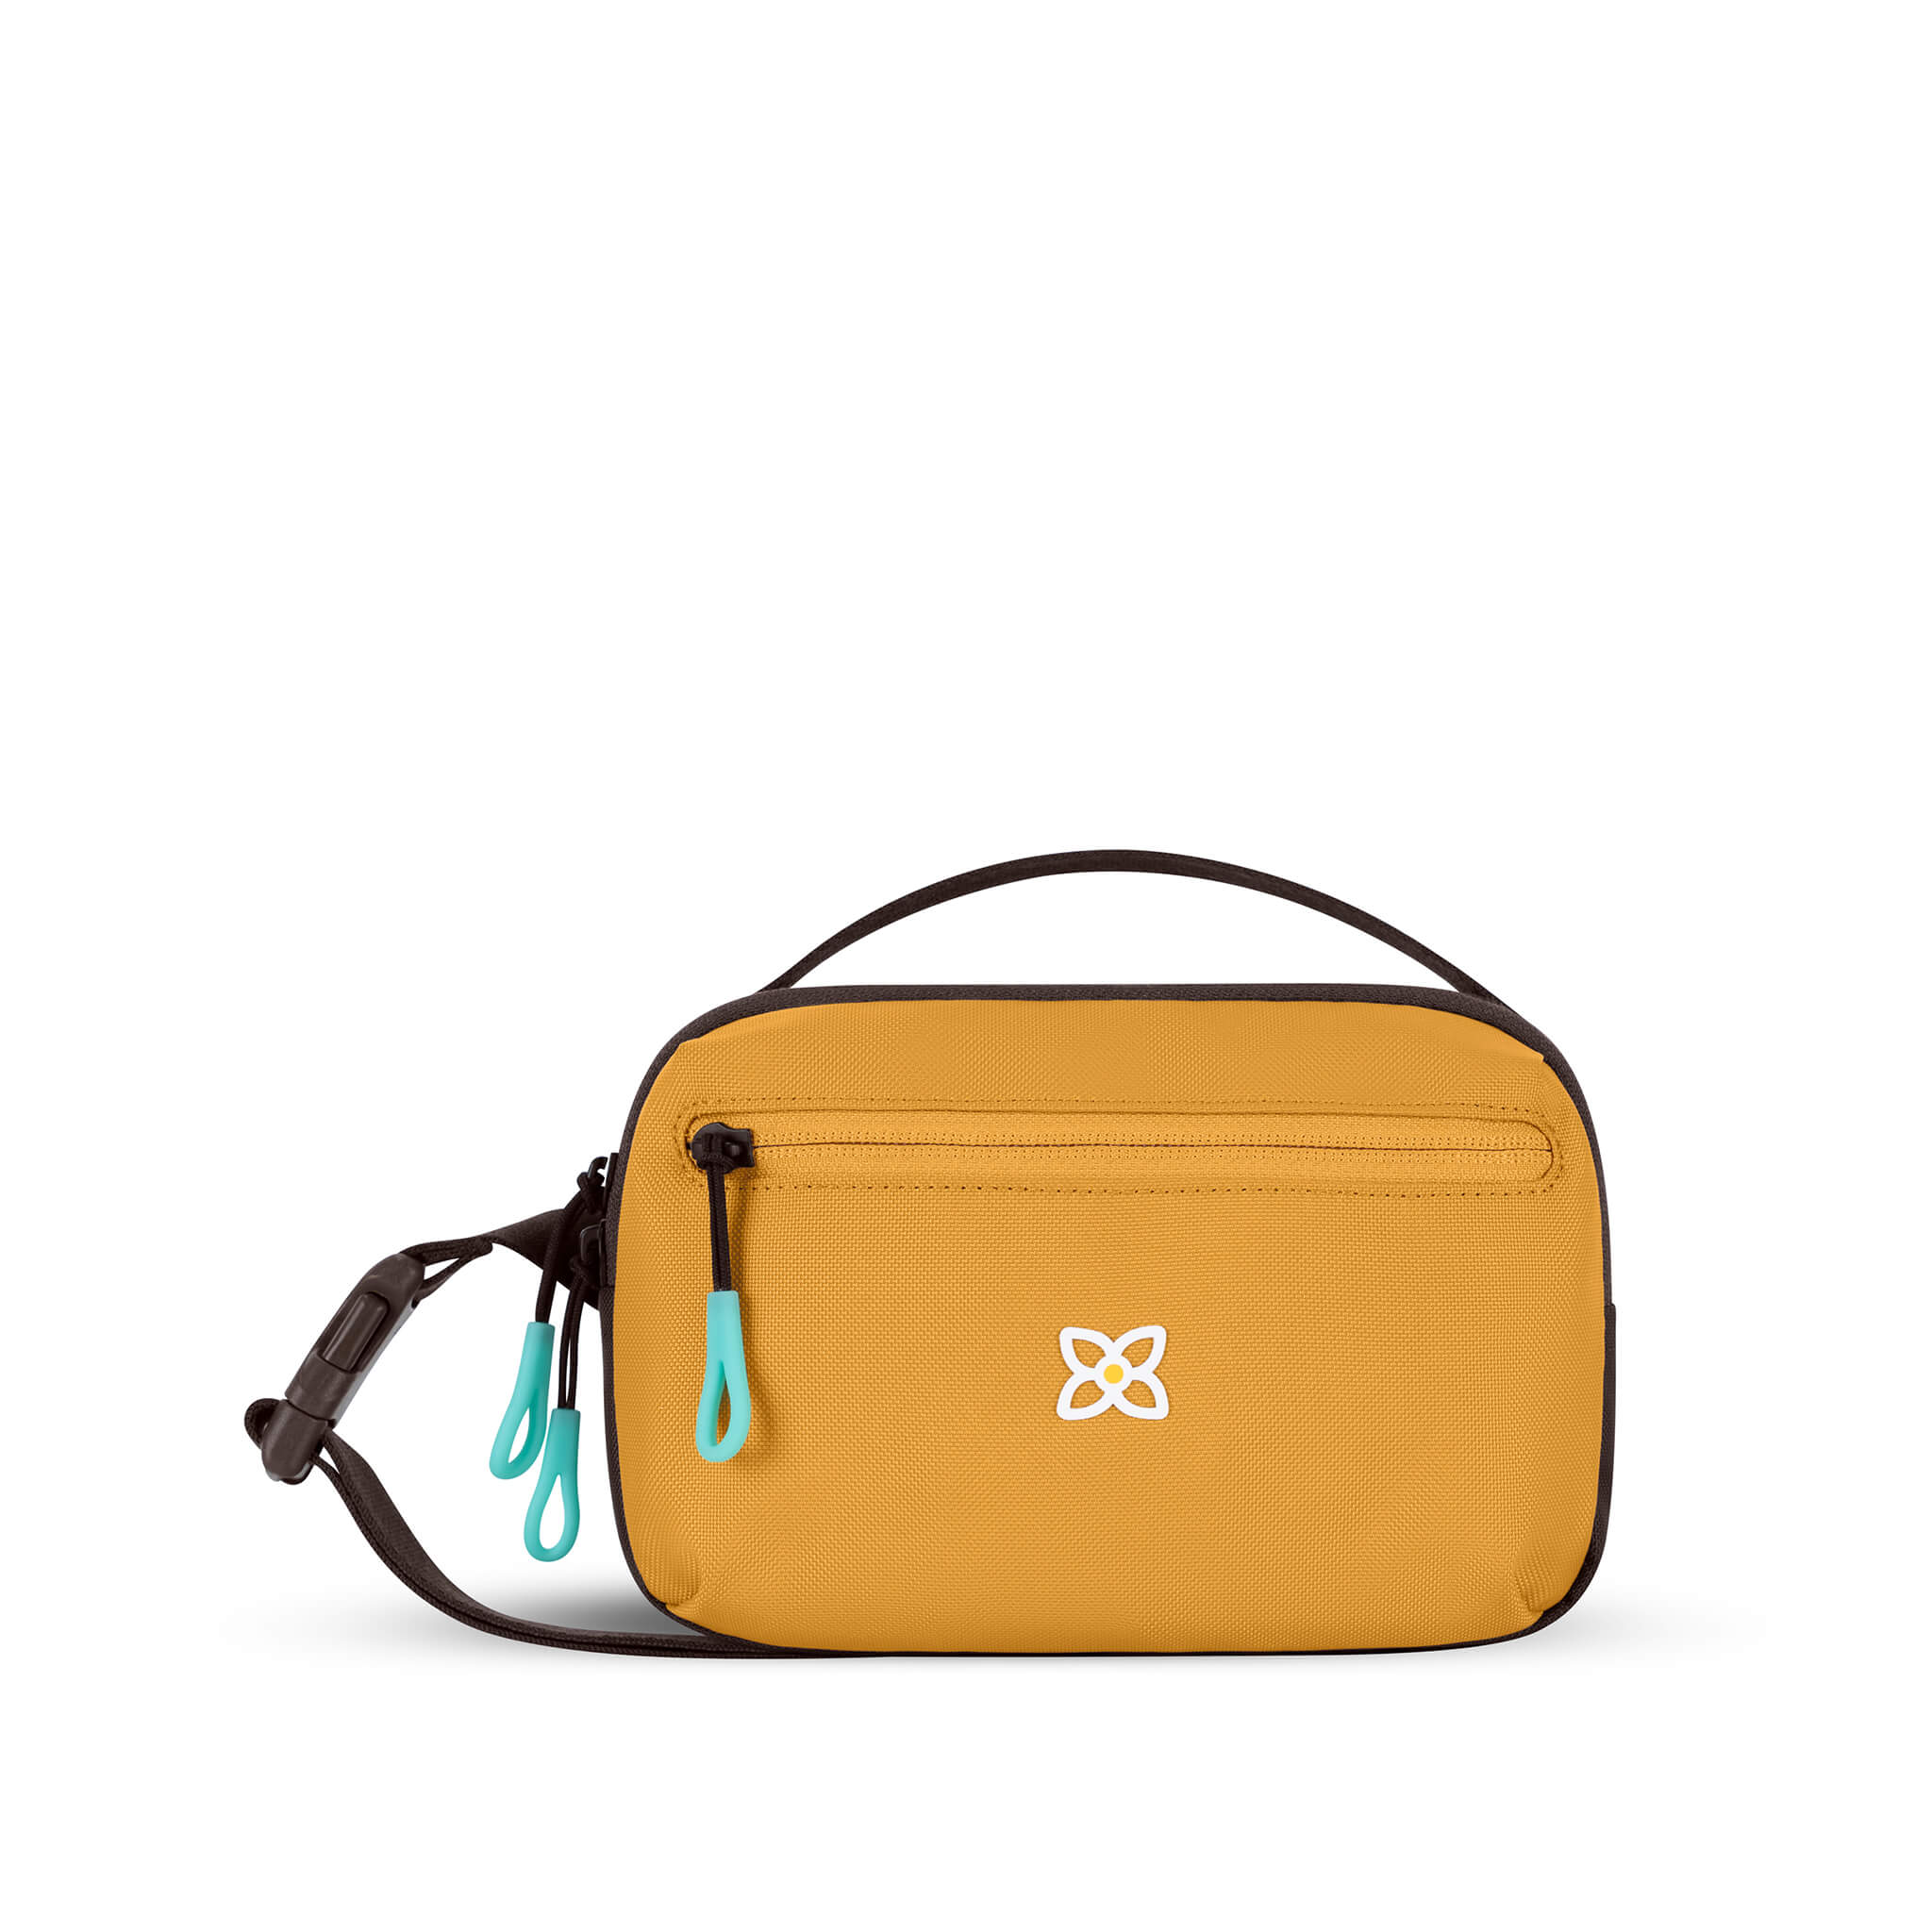 Flat front view of Sherpani hip pack, the Hyk in Sundial. Hyk features include an adjustable waist strap, two external zipper pockets, an internal zipper pocket and RFID-blocking technology to block cyber theft. The Sundial color is yellow with turquoise accents.